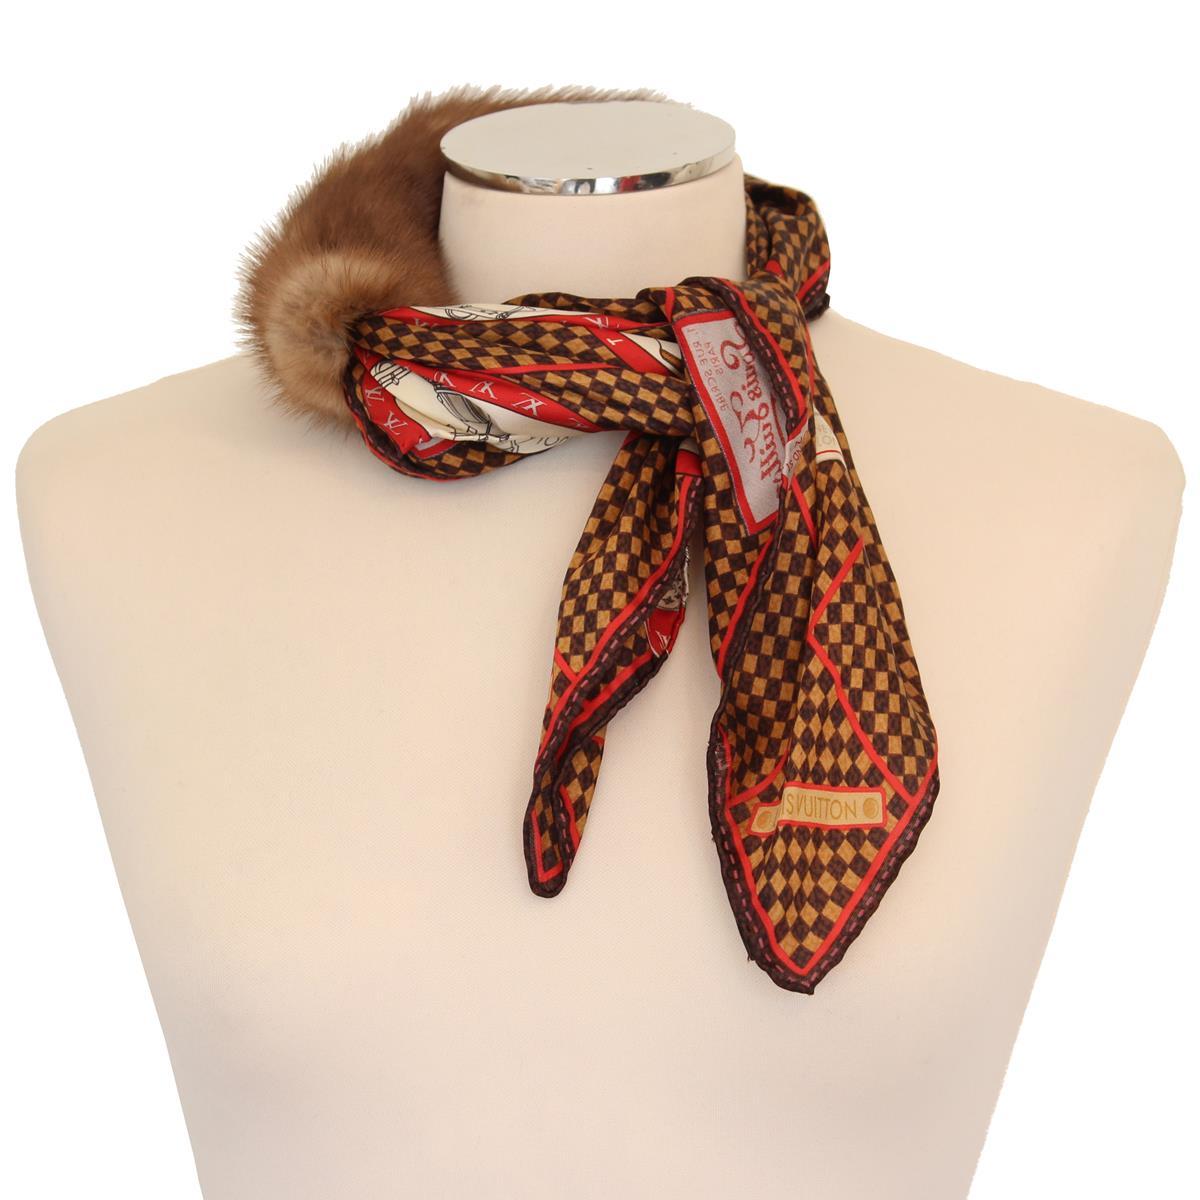 Beautiful and ironic scarf/bracelet bt Vuitton
Silk
Real mink fur
Fancy print
Can be used both as scarf or bracelet
Scarf cm 55 x 52 (21.65 x 20.4 inches)
Worldwide express shipping included in the price !